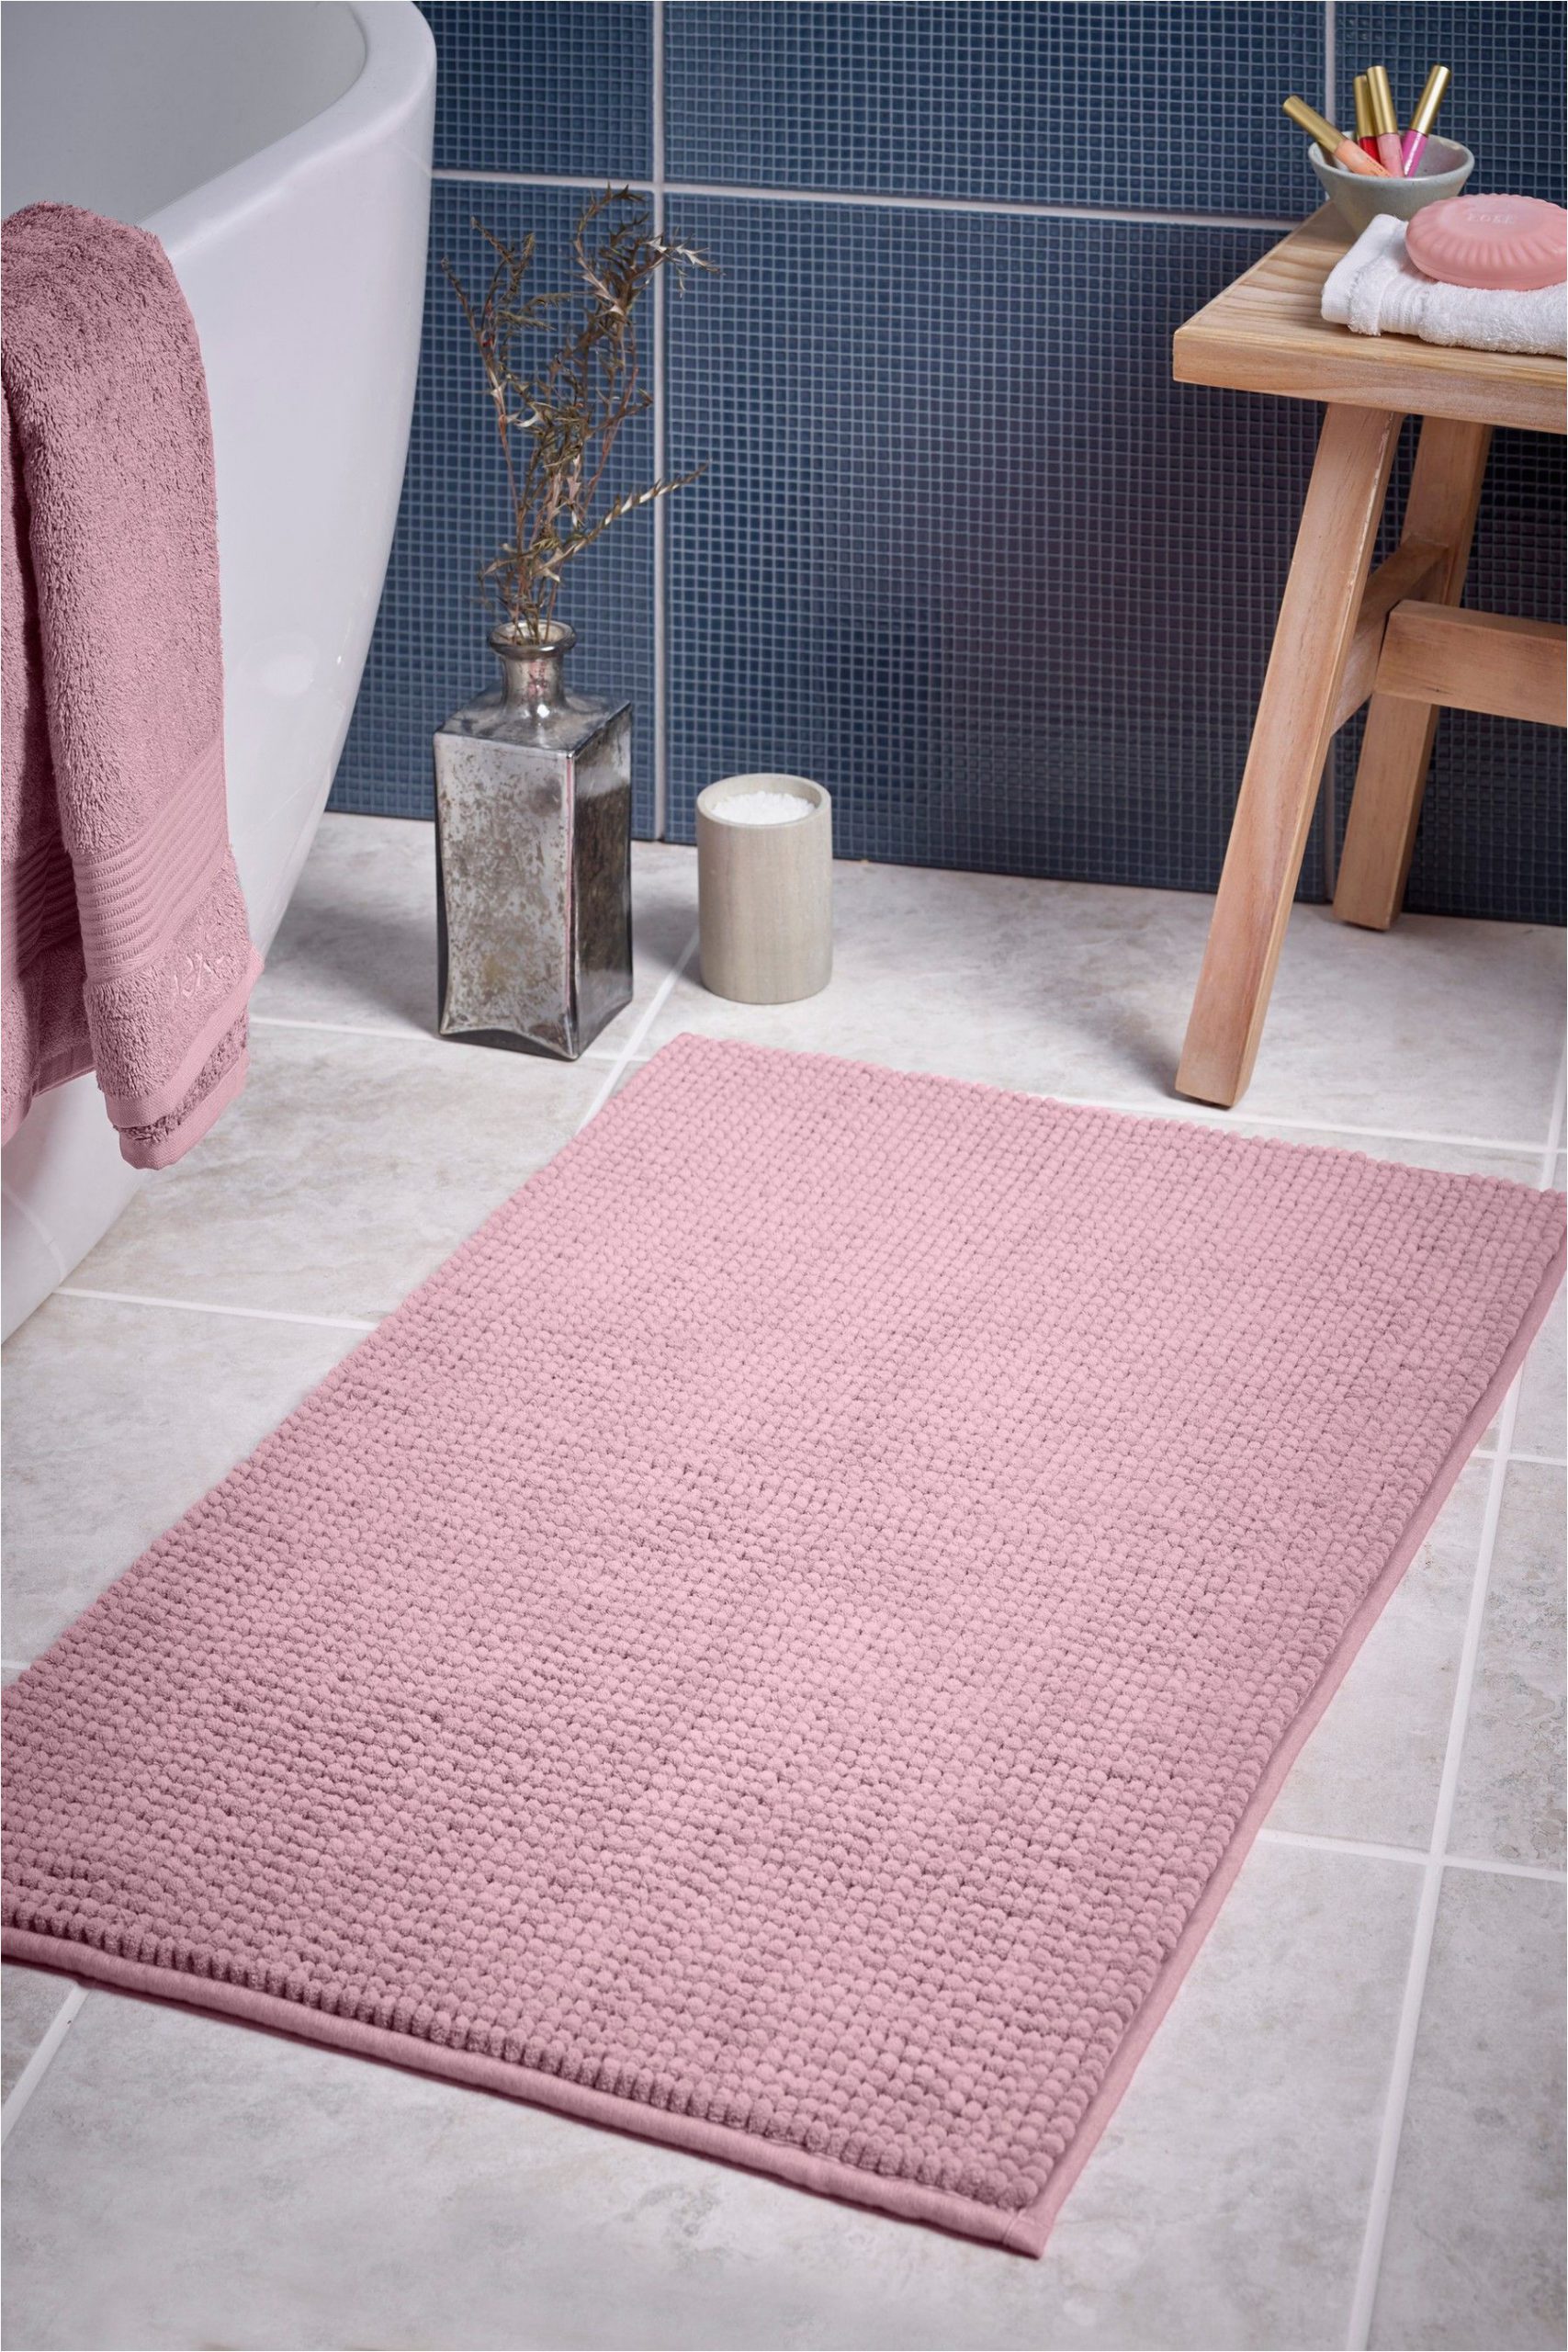 Purple Bathroom Rugs and towels Next Bobble Bath Mat Pink In 2020